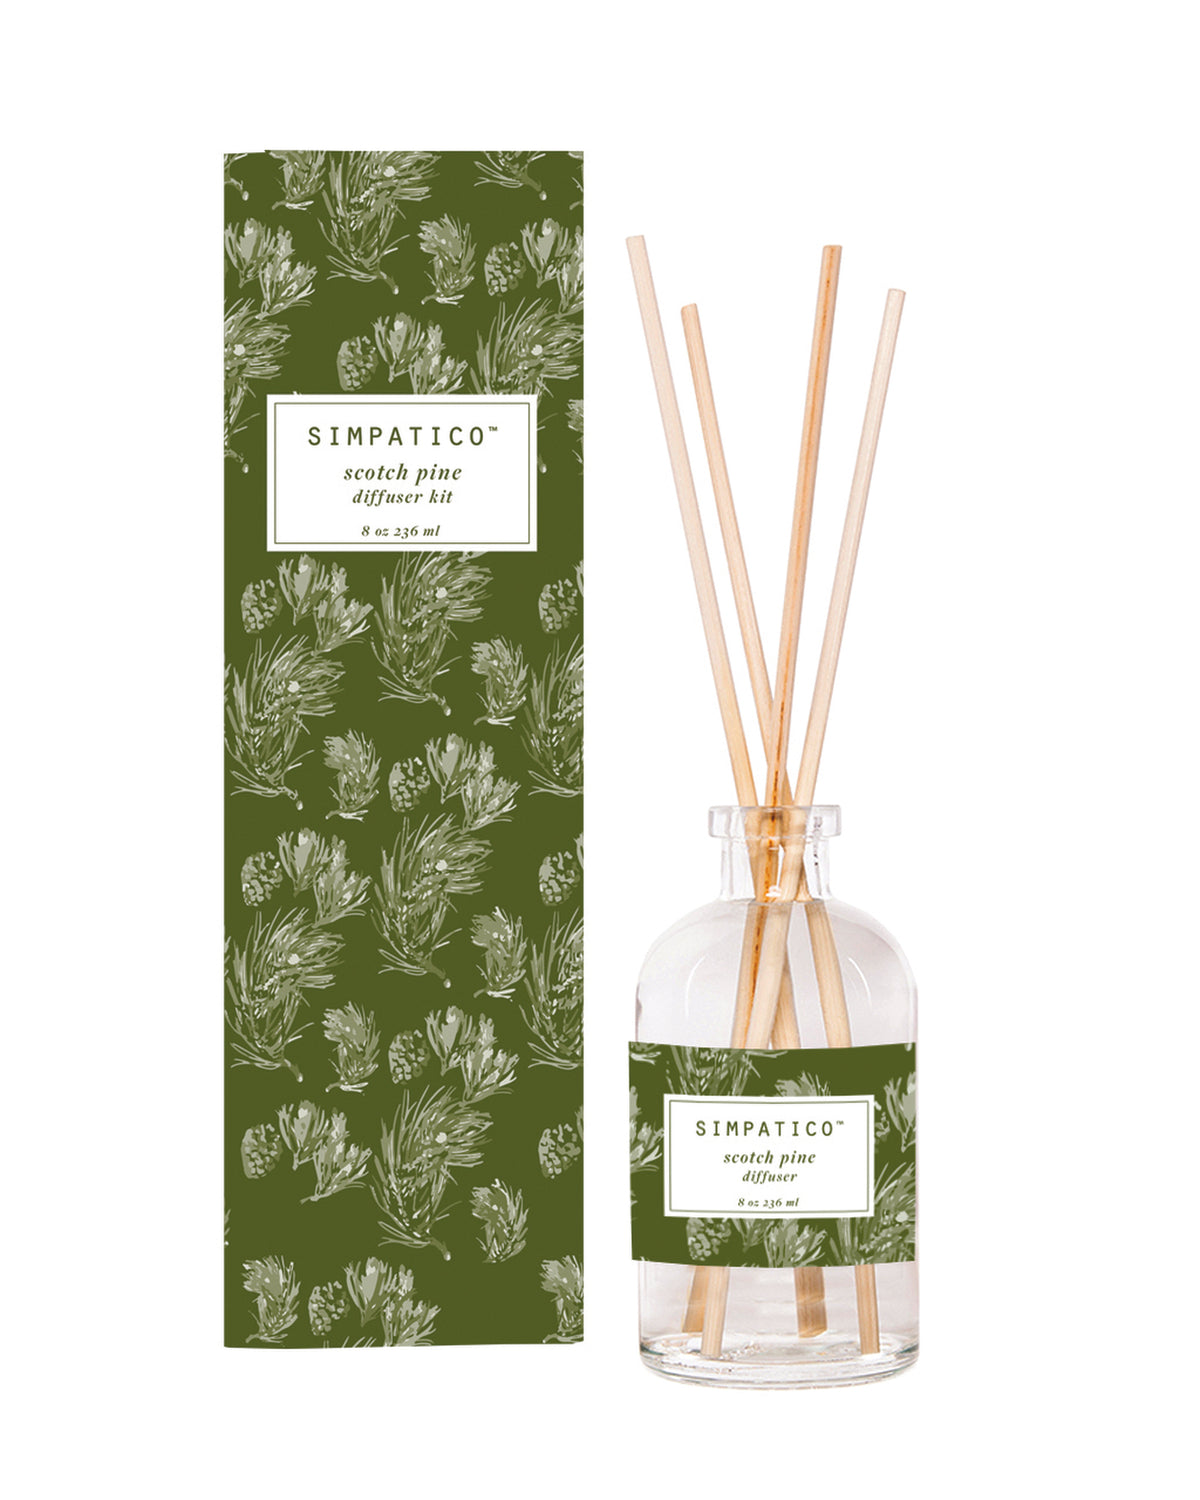 A Simpatico Scotch Pine Diffuser with essential oils in a bottle labeled "simpatico scotch pine #72" and wooden sticks, placed next to its packaging box featuring a green, pine needle design.